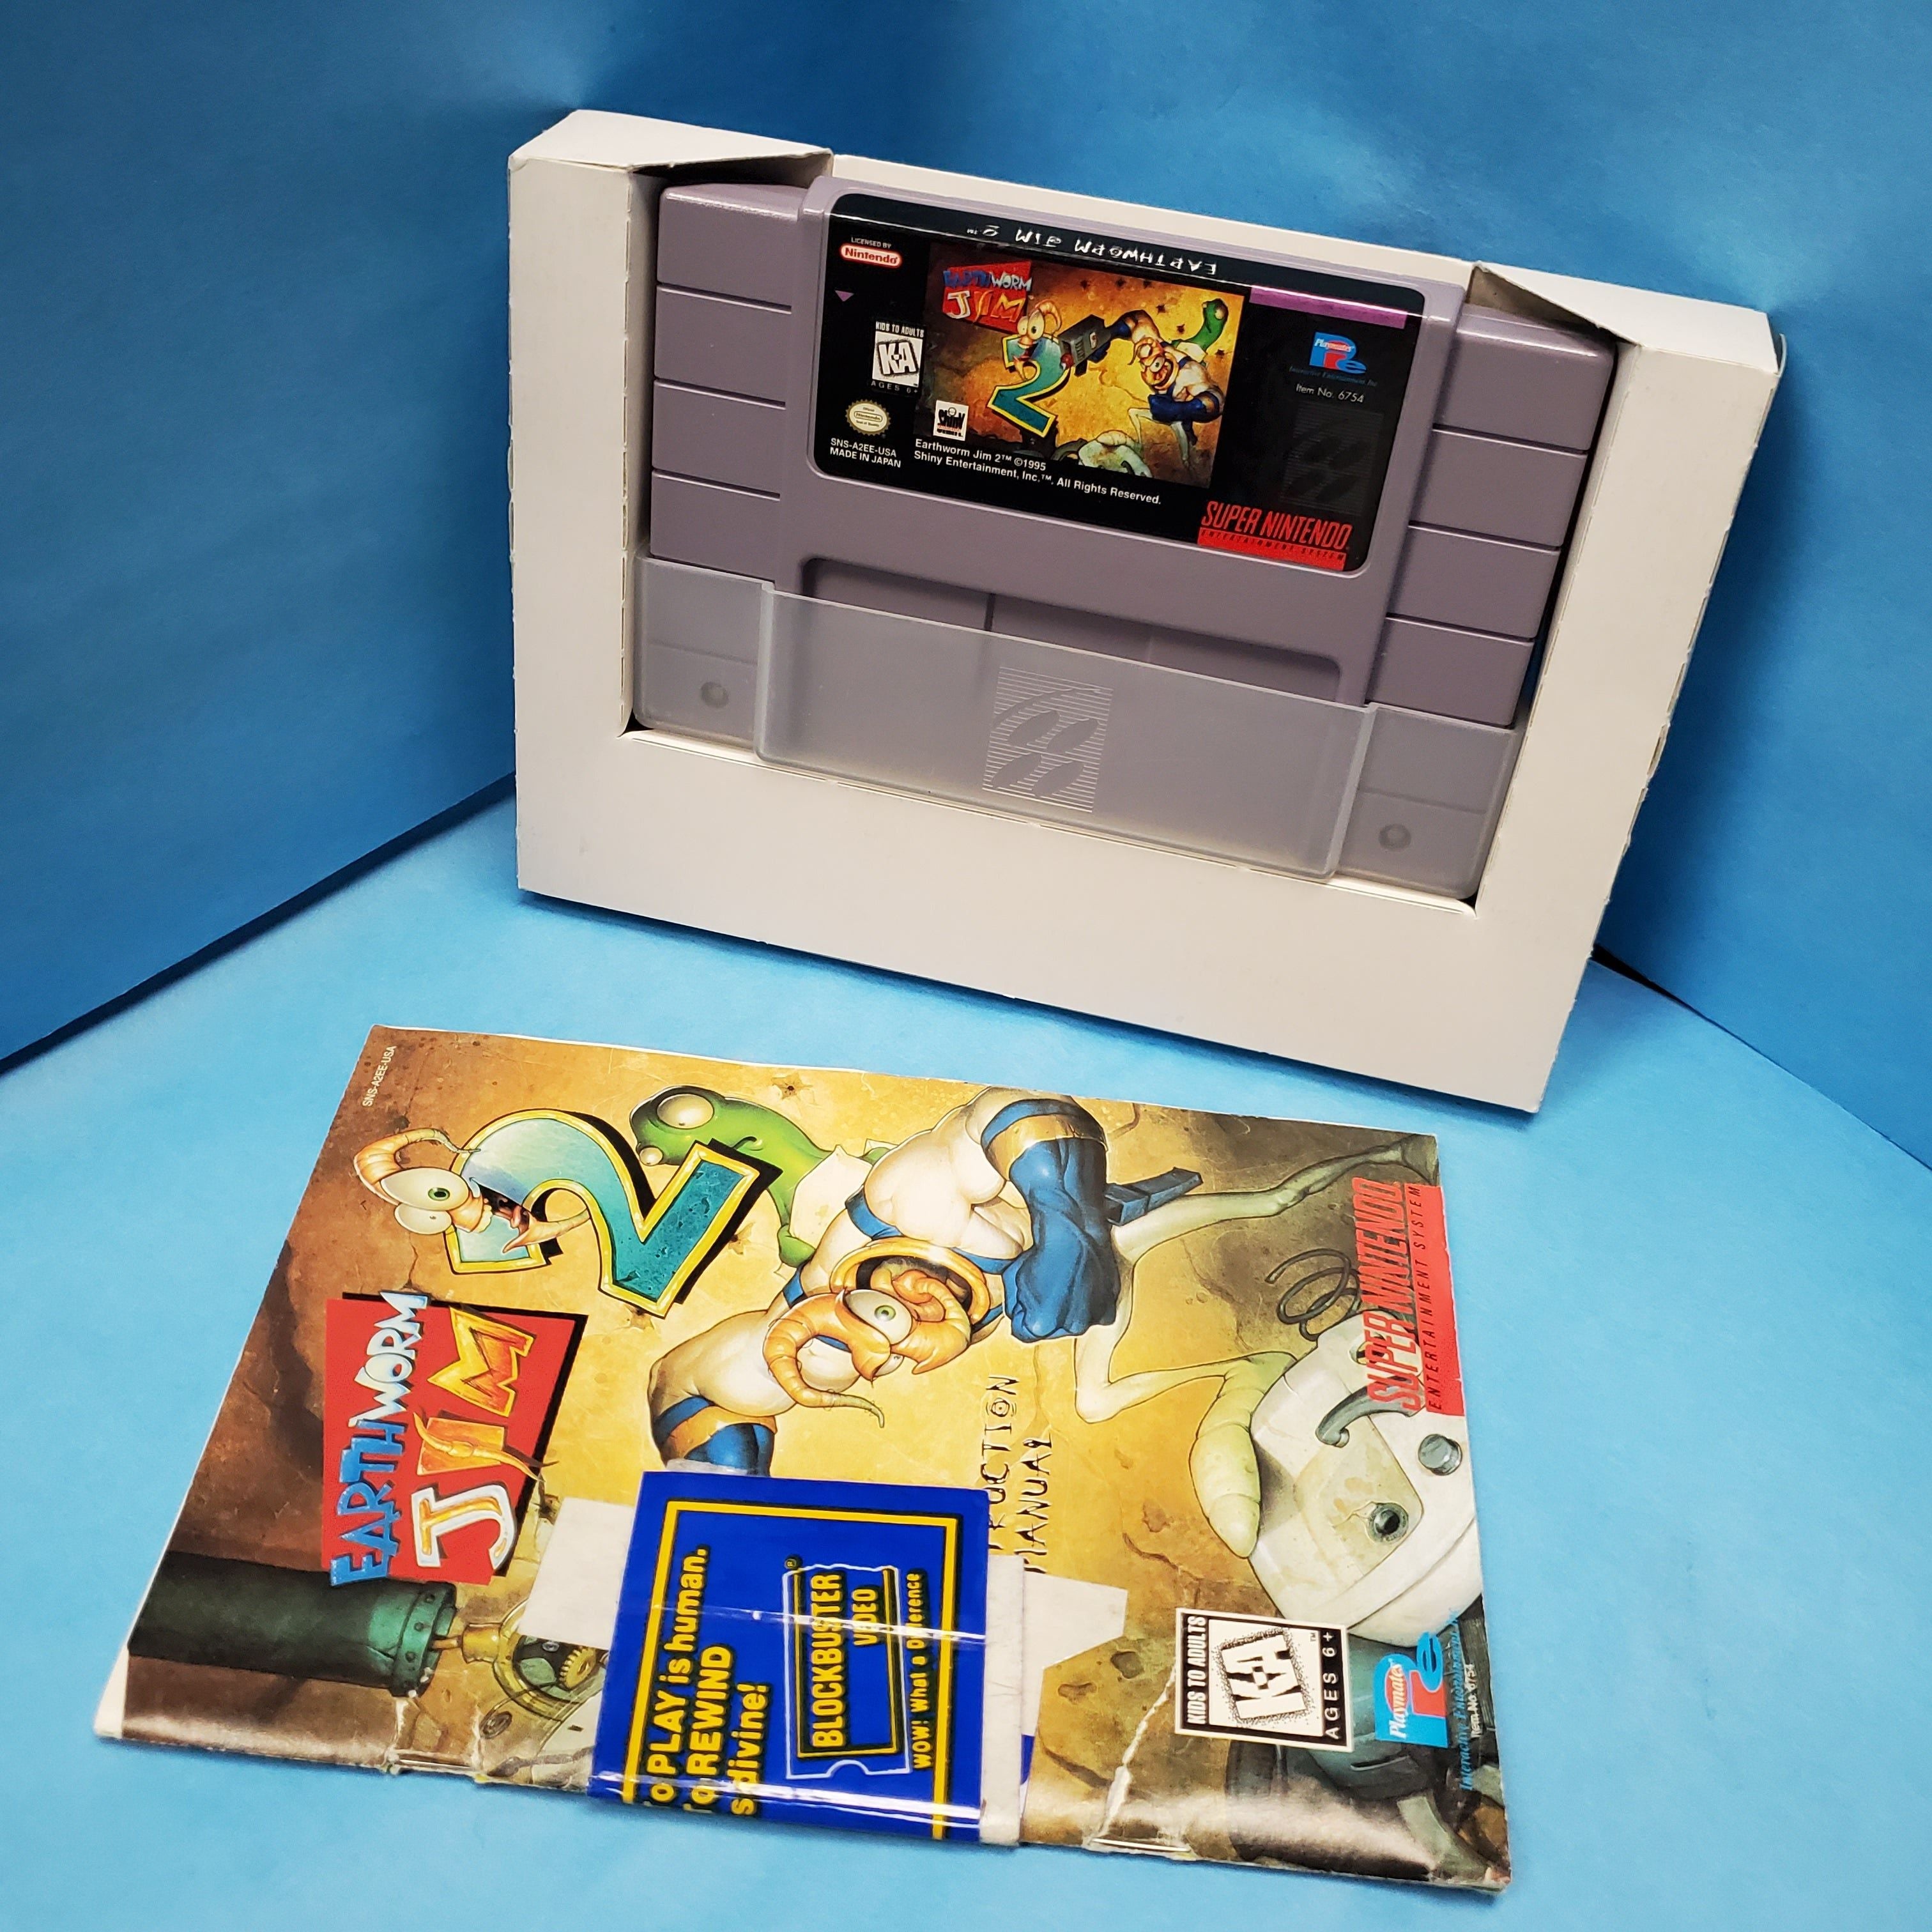 SNES - Earthworm Jim 2 (Complete in Box / B- / Rough Manual)